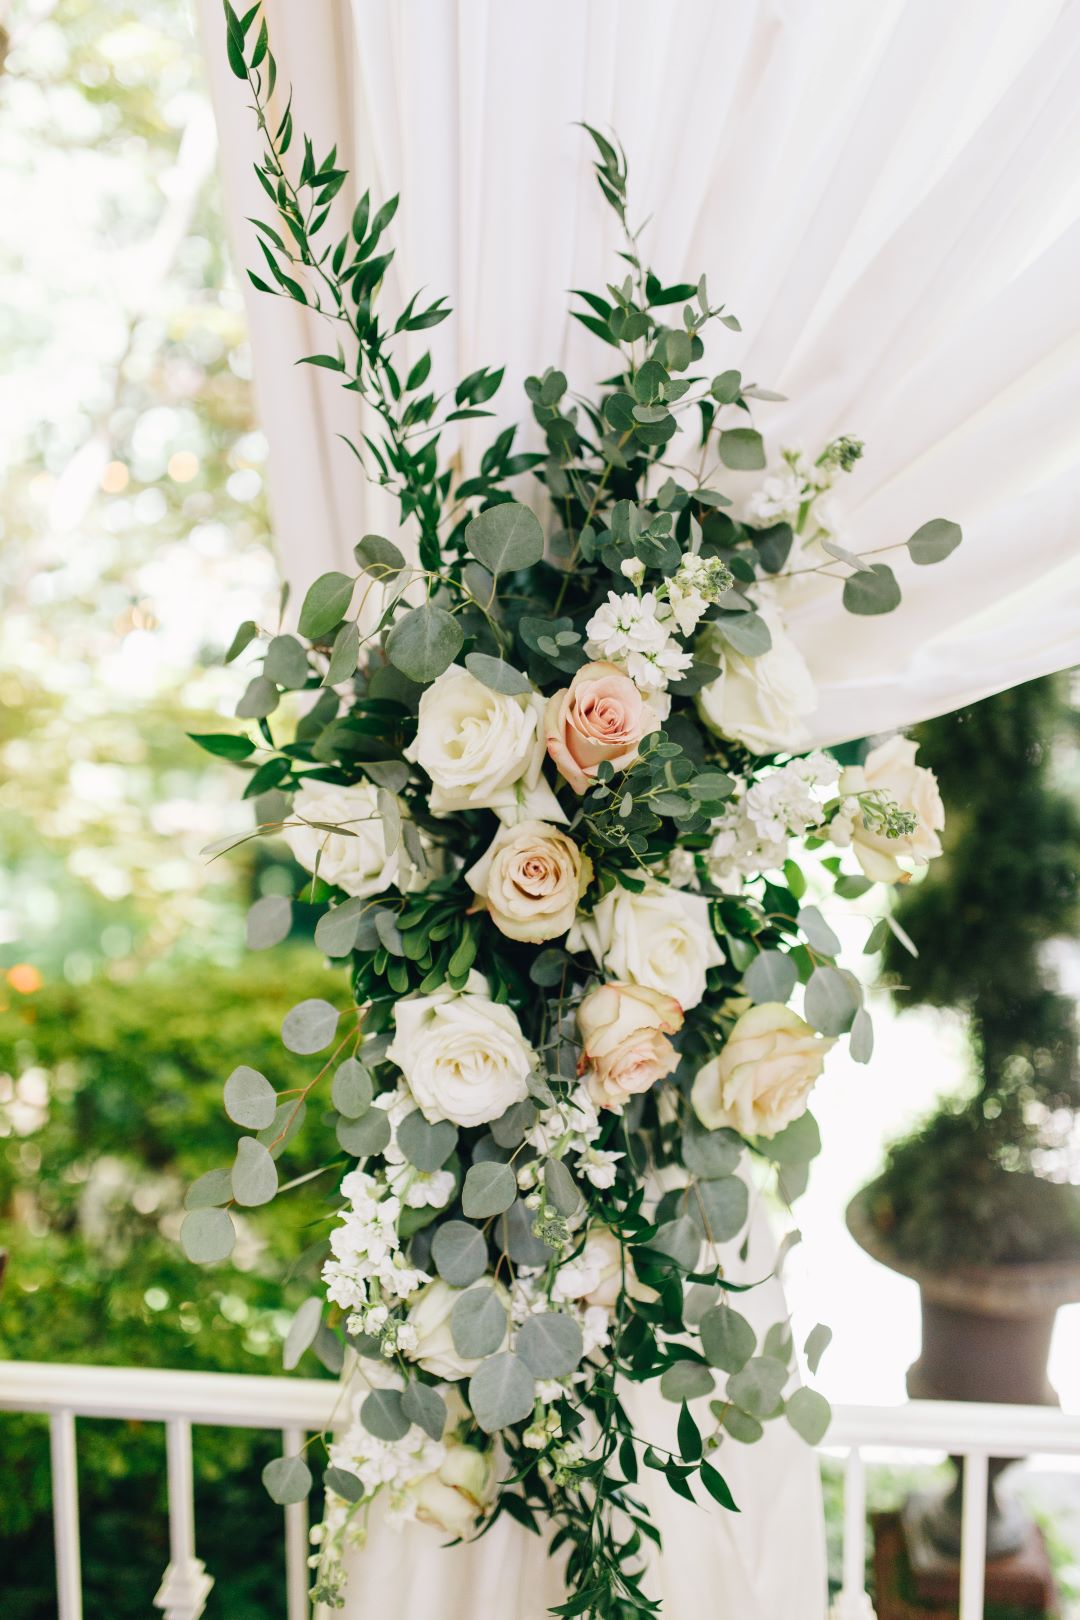 blush and cream roses with eucalyptus and other greenery at earthy summer garden wedding in September, neutrals